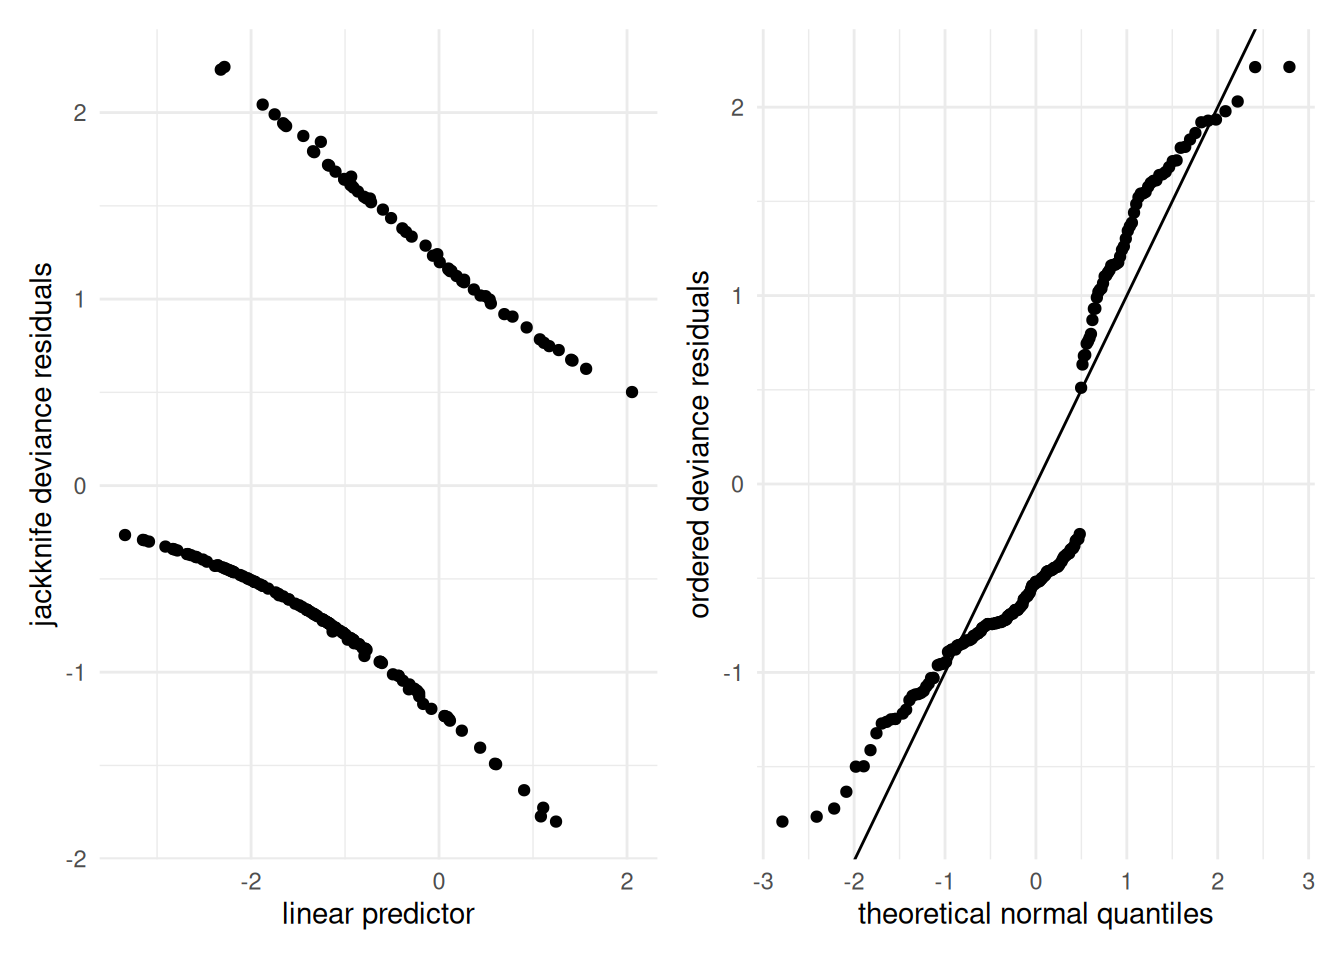 Diagnostic plots for the binary regression for the birth weight data: jackknife deviance residuals against linear predictor (left) and quantile-quantile plot of ordered deviance residuals (right).